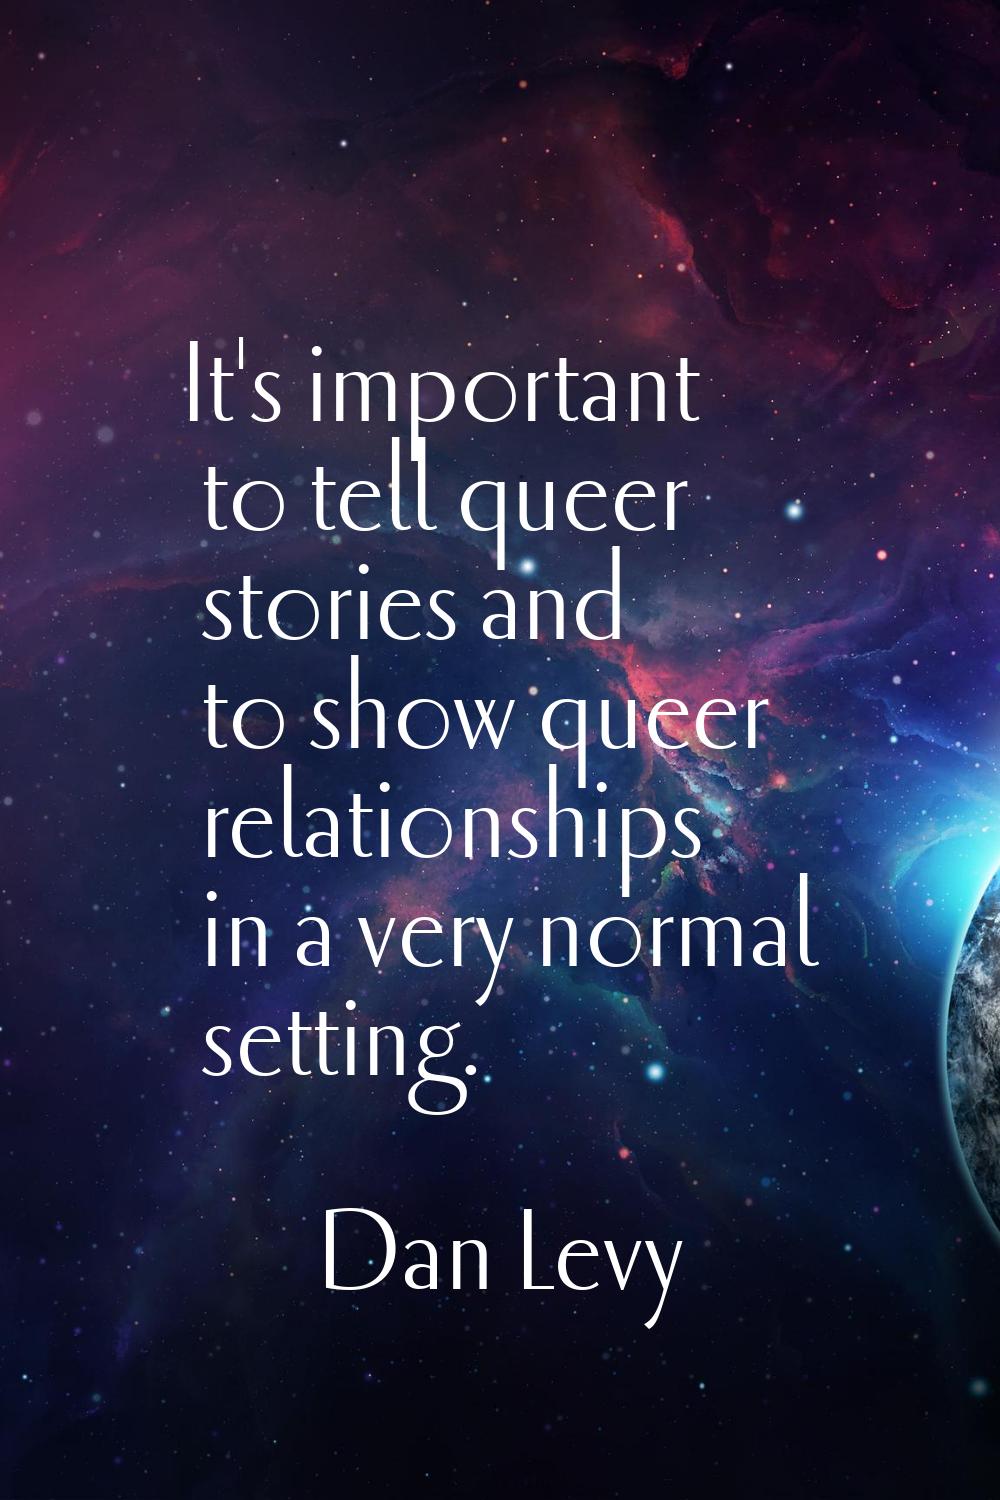 It's important to tell queer stories and to show queer relationships in a very normal setting.